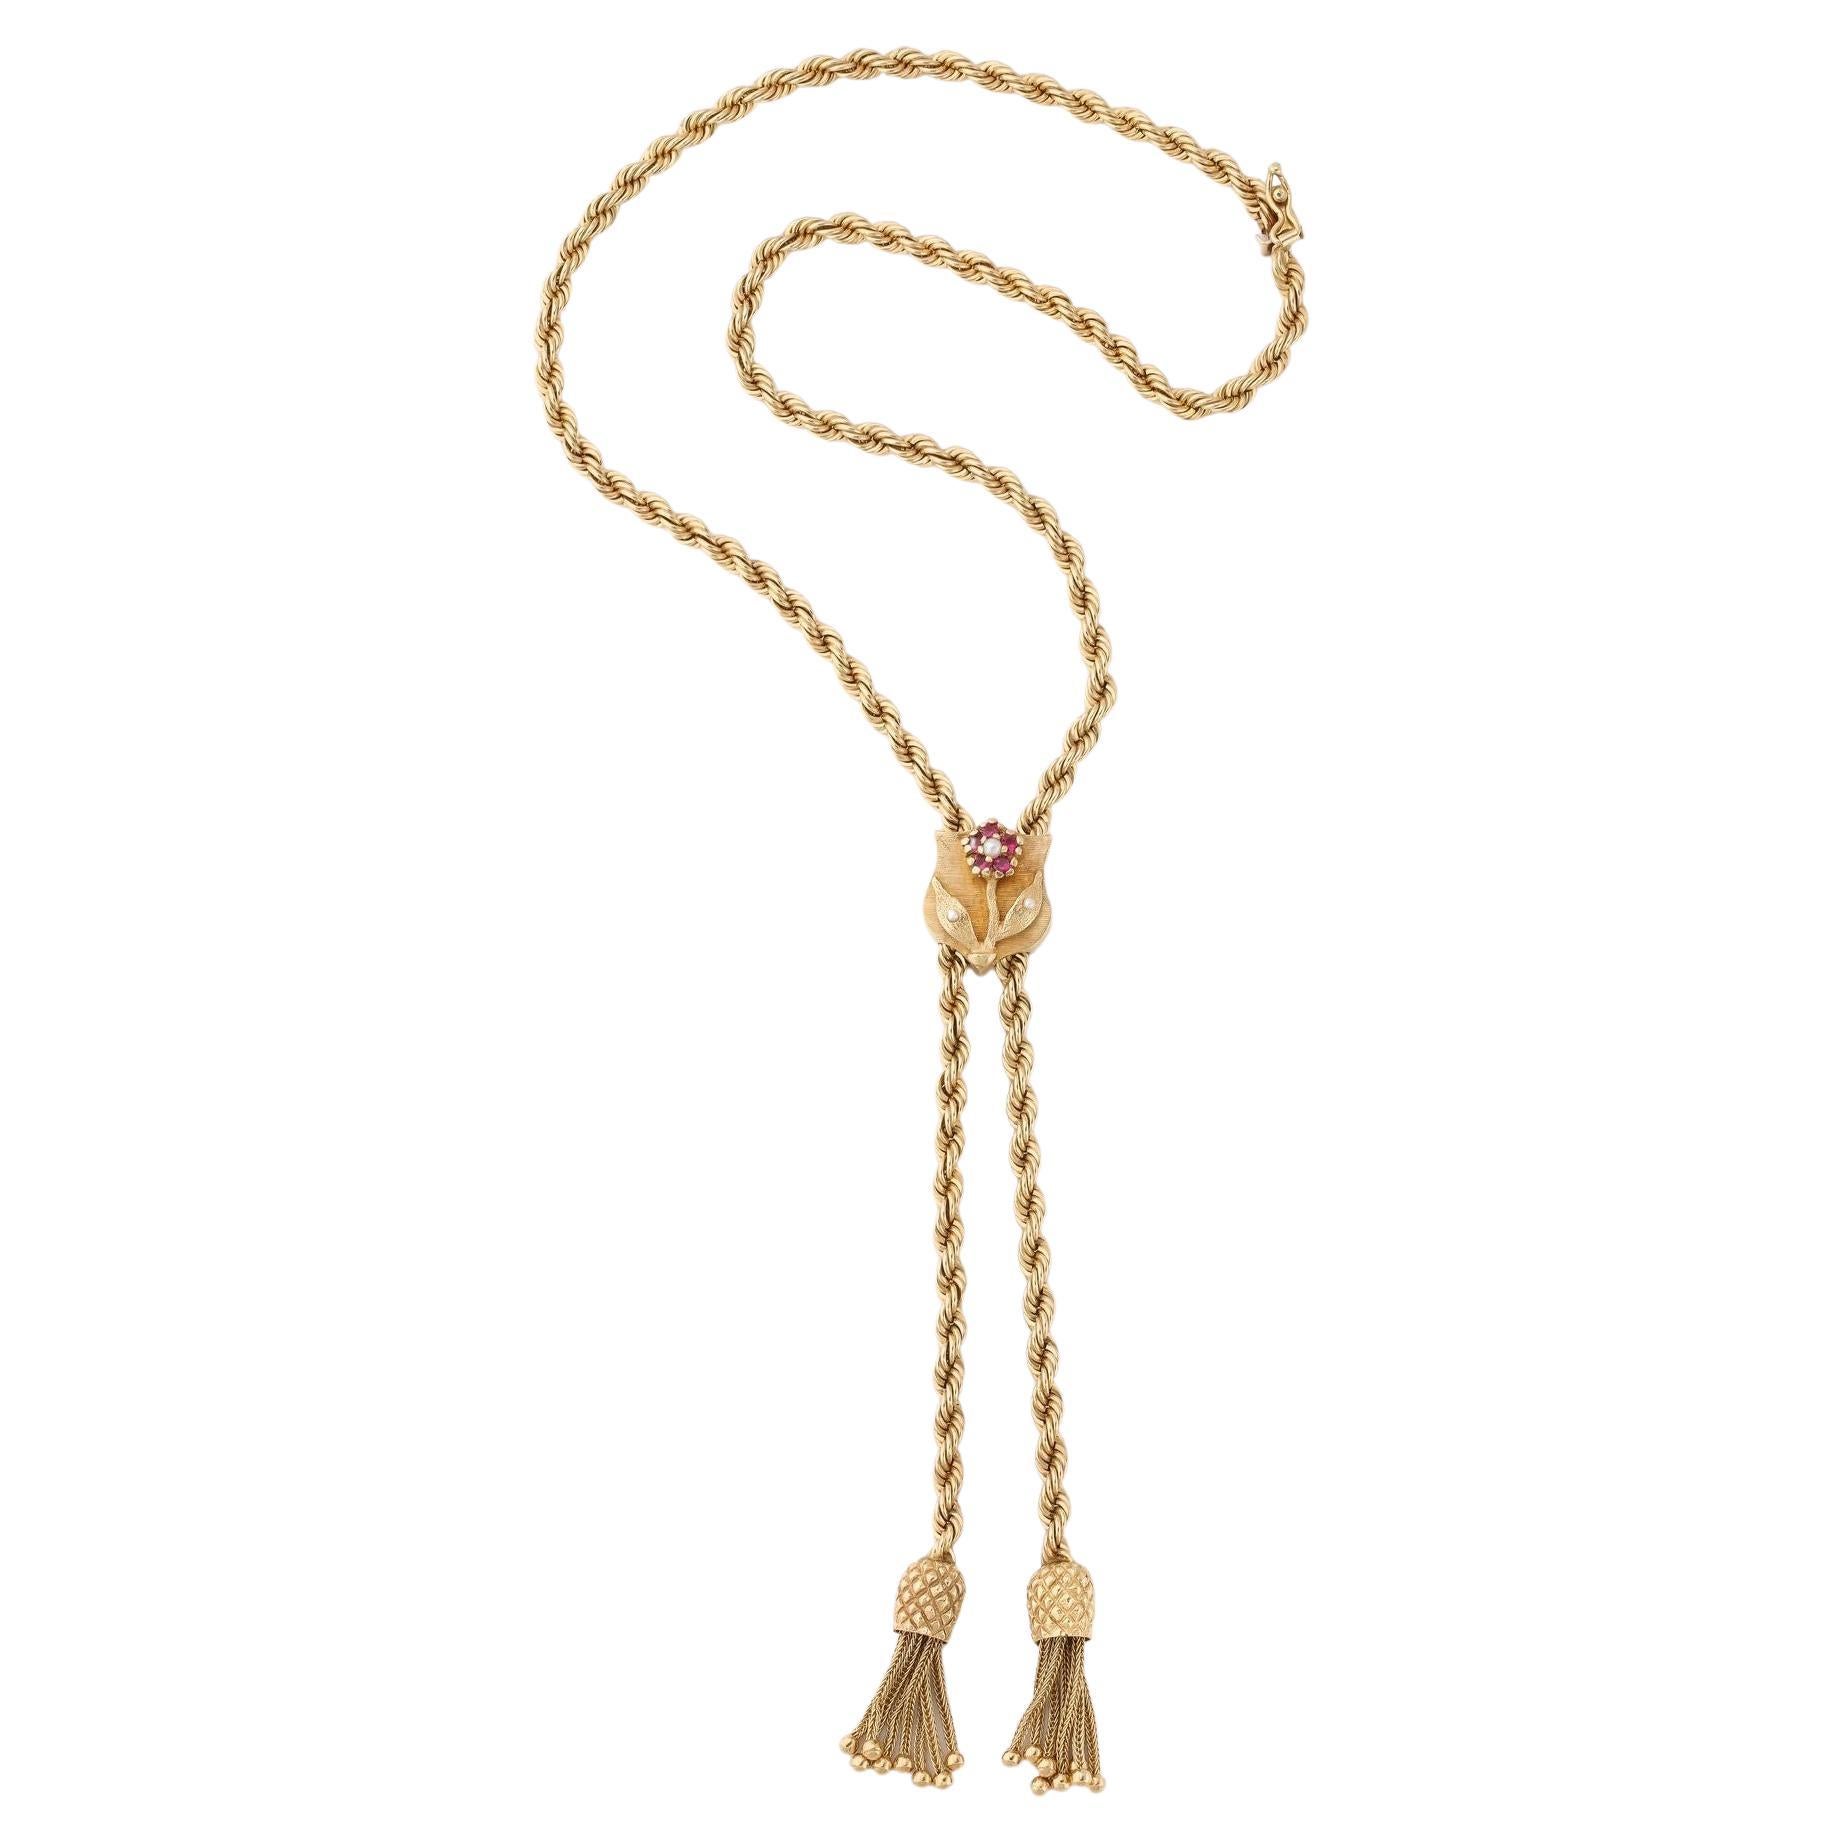 Retro Gold Lariat on Rope Twist Chain with Tassels and a Ruby and Pearl Flower